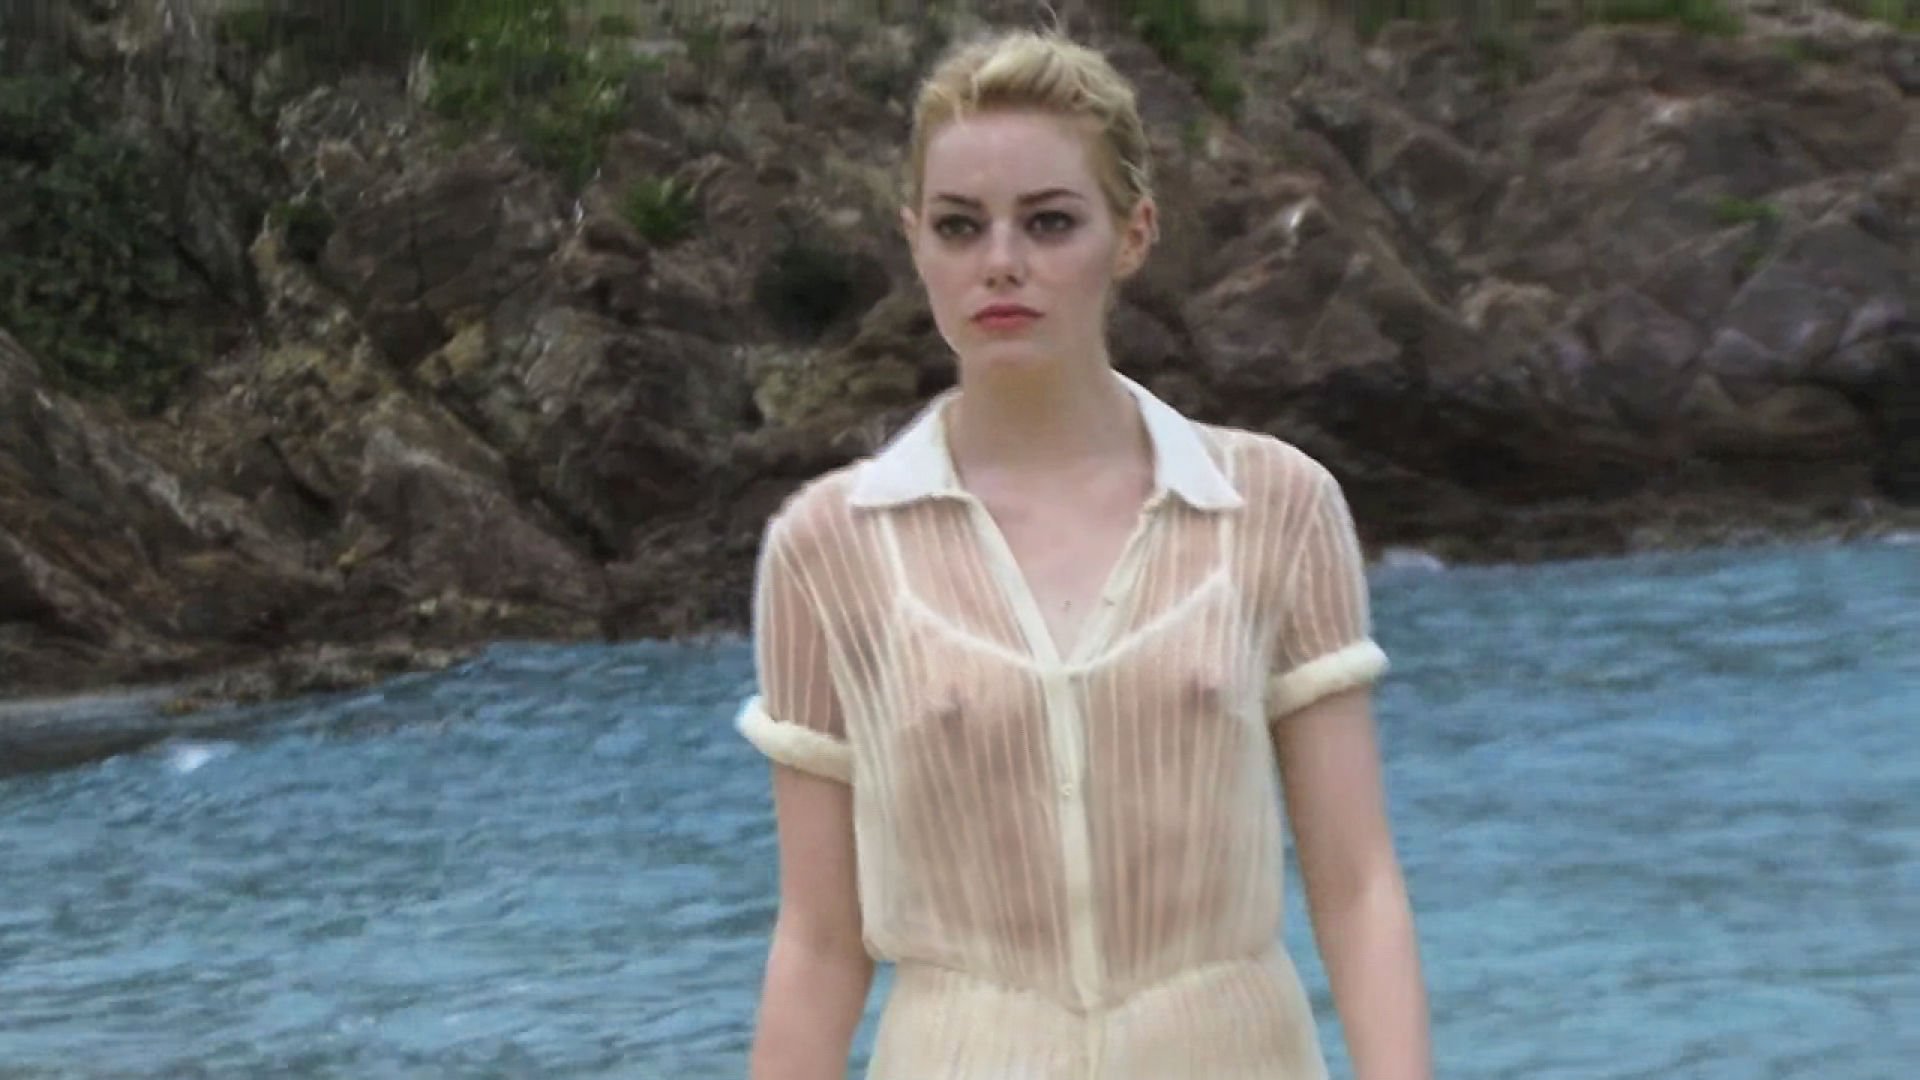 A-List Actress Emma Stone Showing Her Pointy Nipples (7 Pictures)